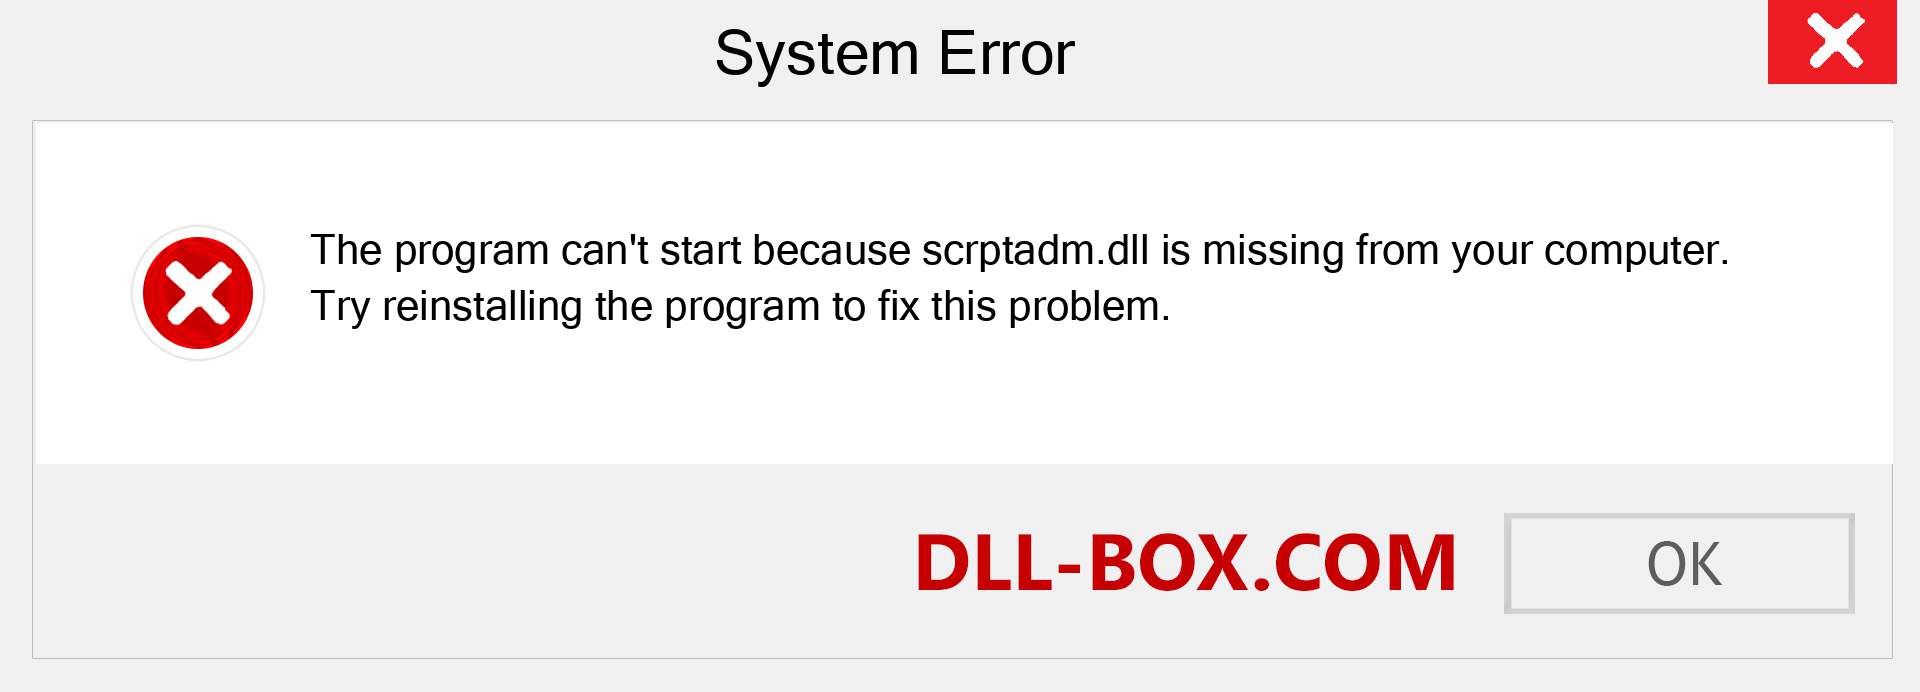  scrptadm.dll file is missing?. Download for Windows 7, 8, 10 - Fix  scrptadm dll Missing Error on Windows, photos, images